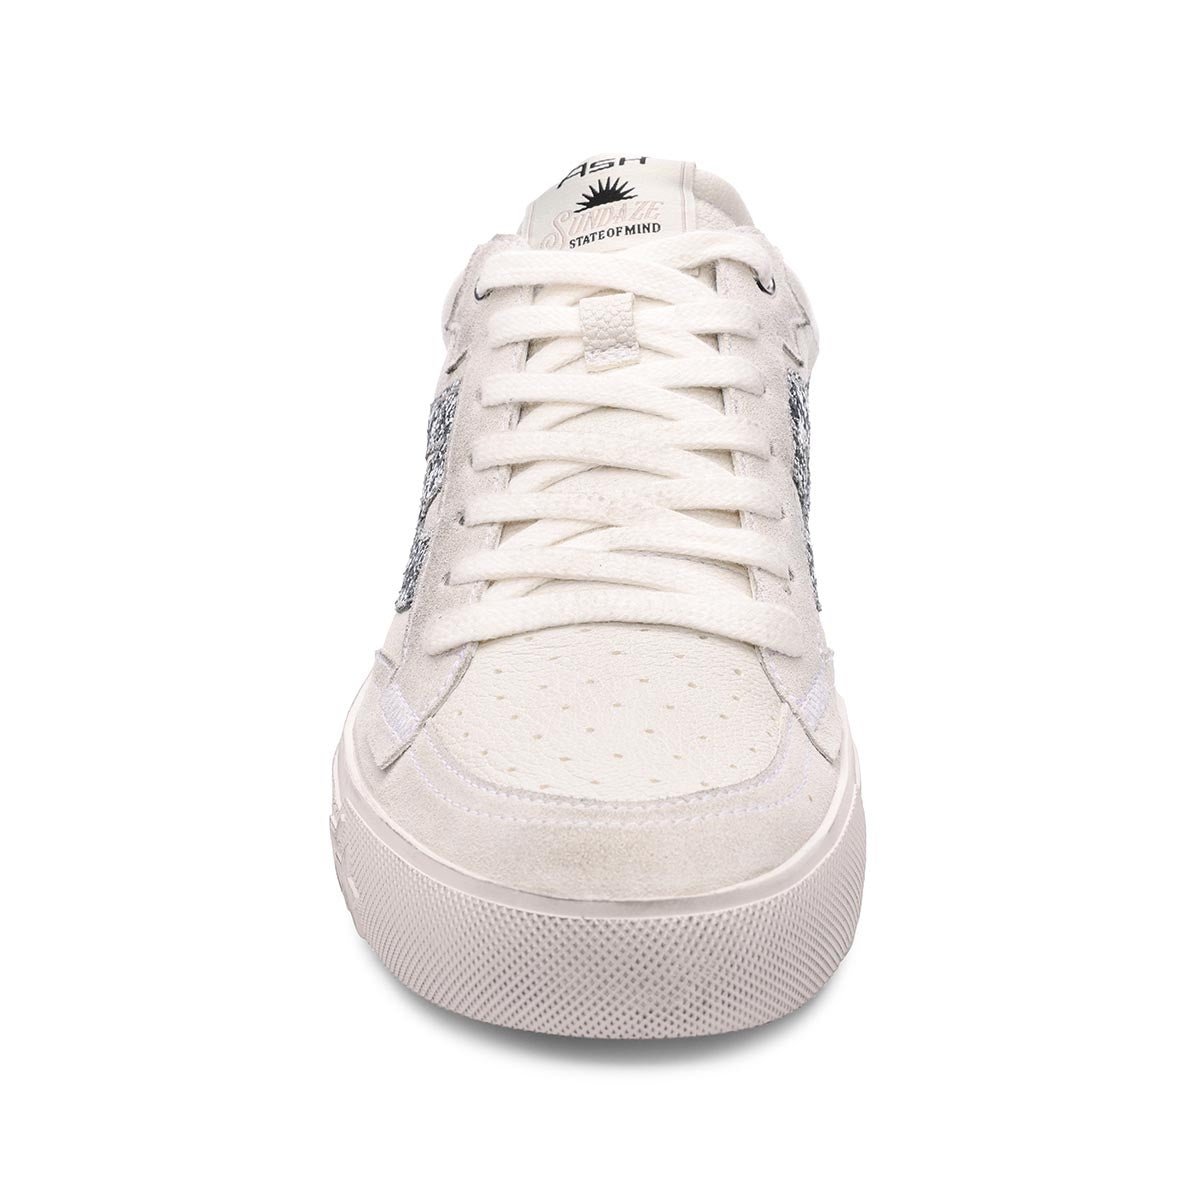 Moonlight Vintage Glitter Sneaker - Off-White/Silver - Front View - ASH